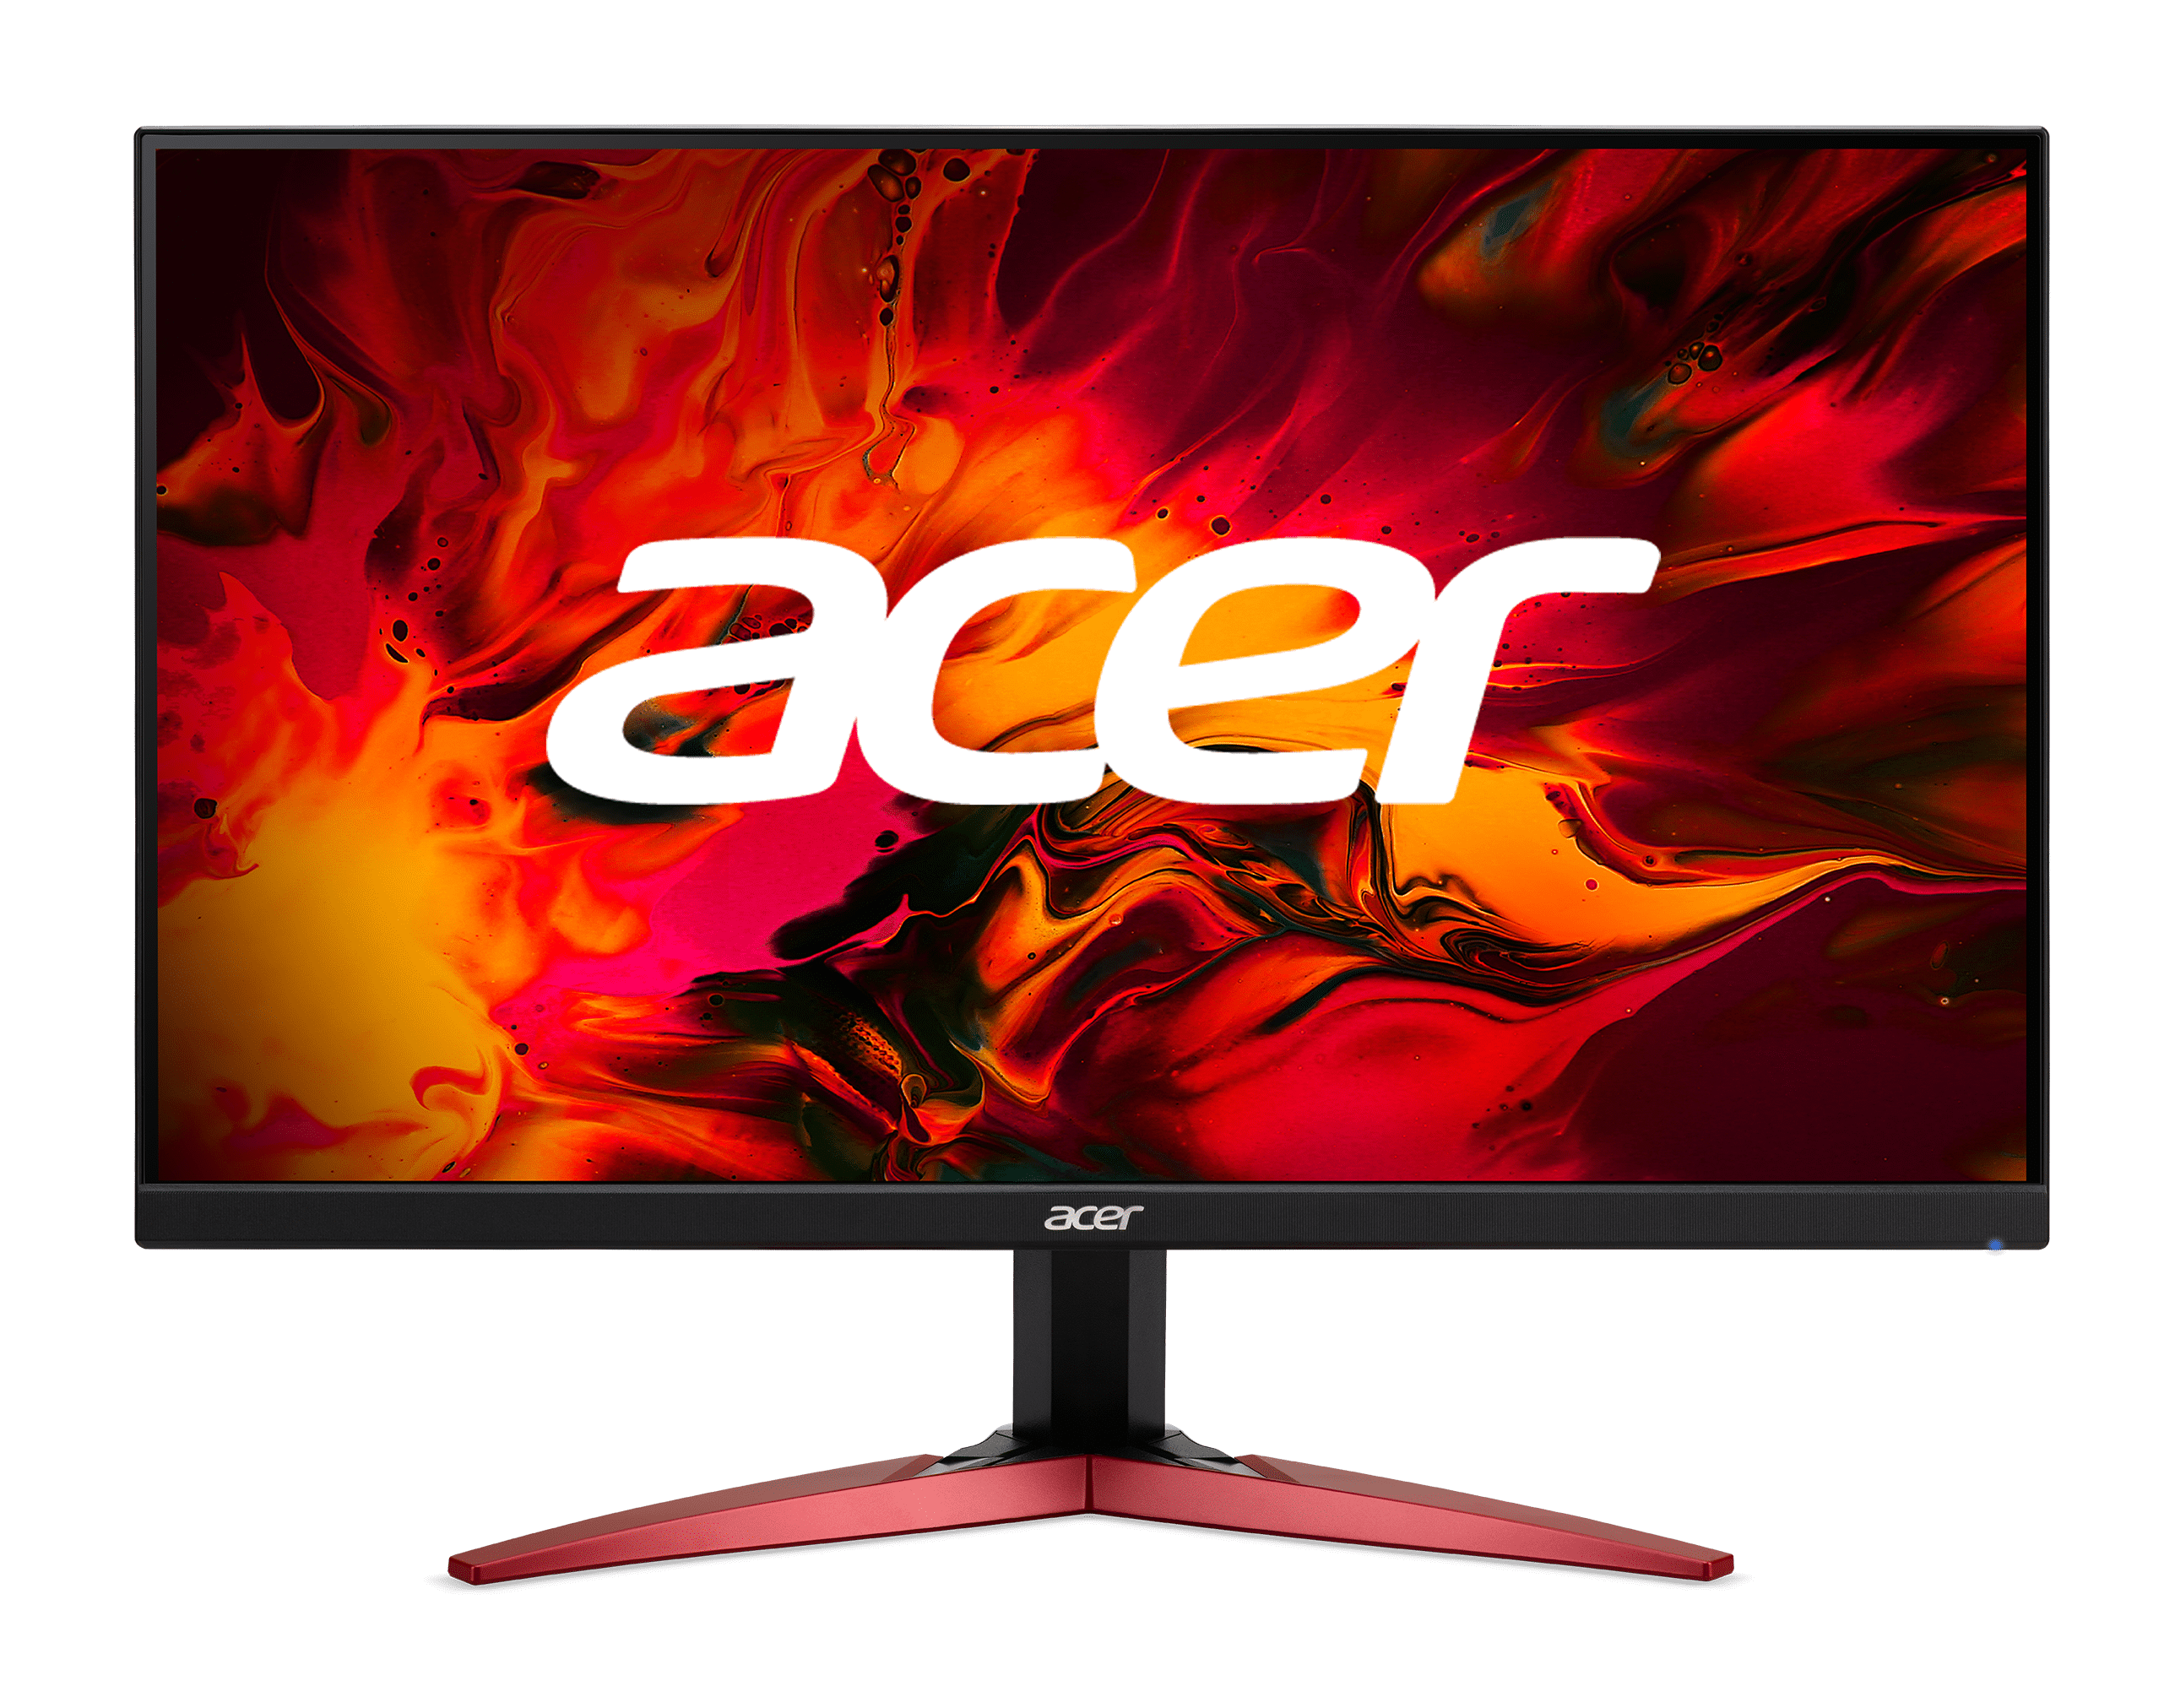 Acer 24.5” Full HD (1920 x 1080) Gaming Monitor with AMD FreeSync